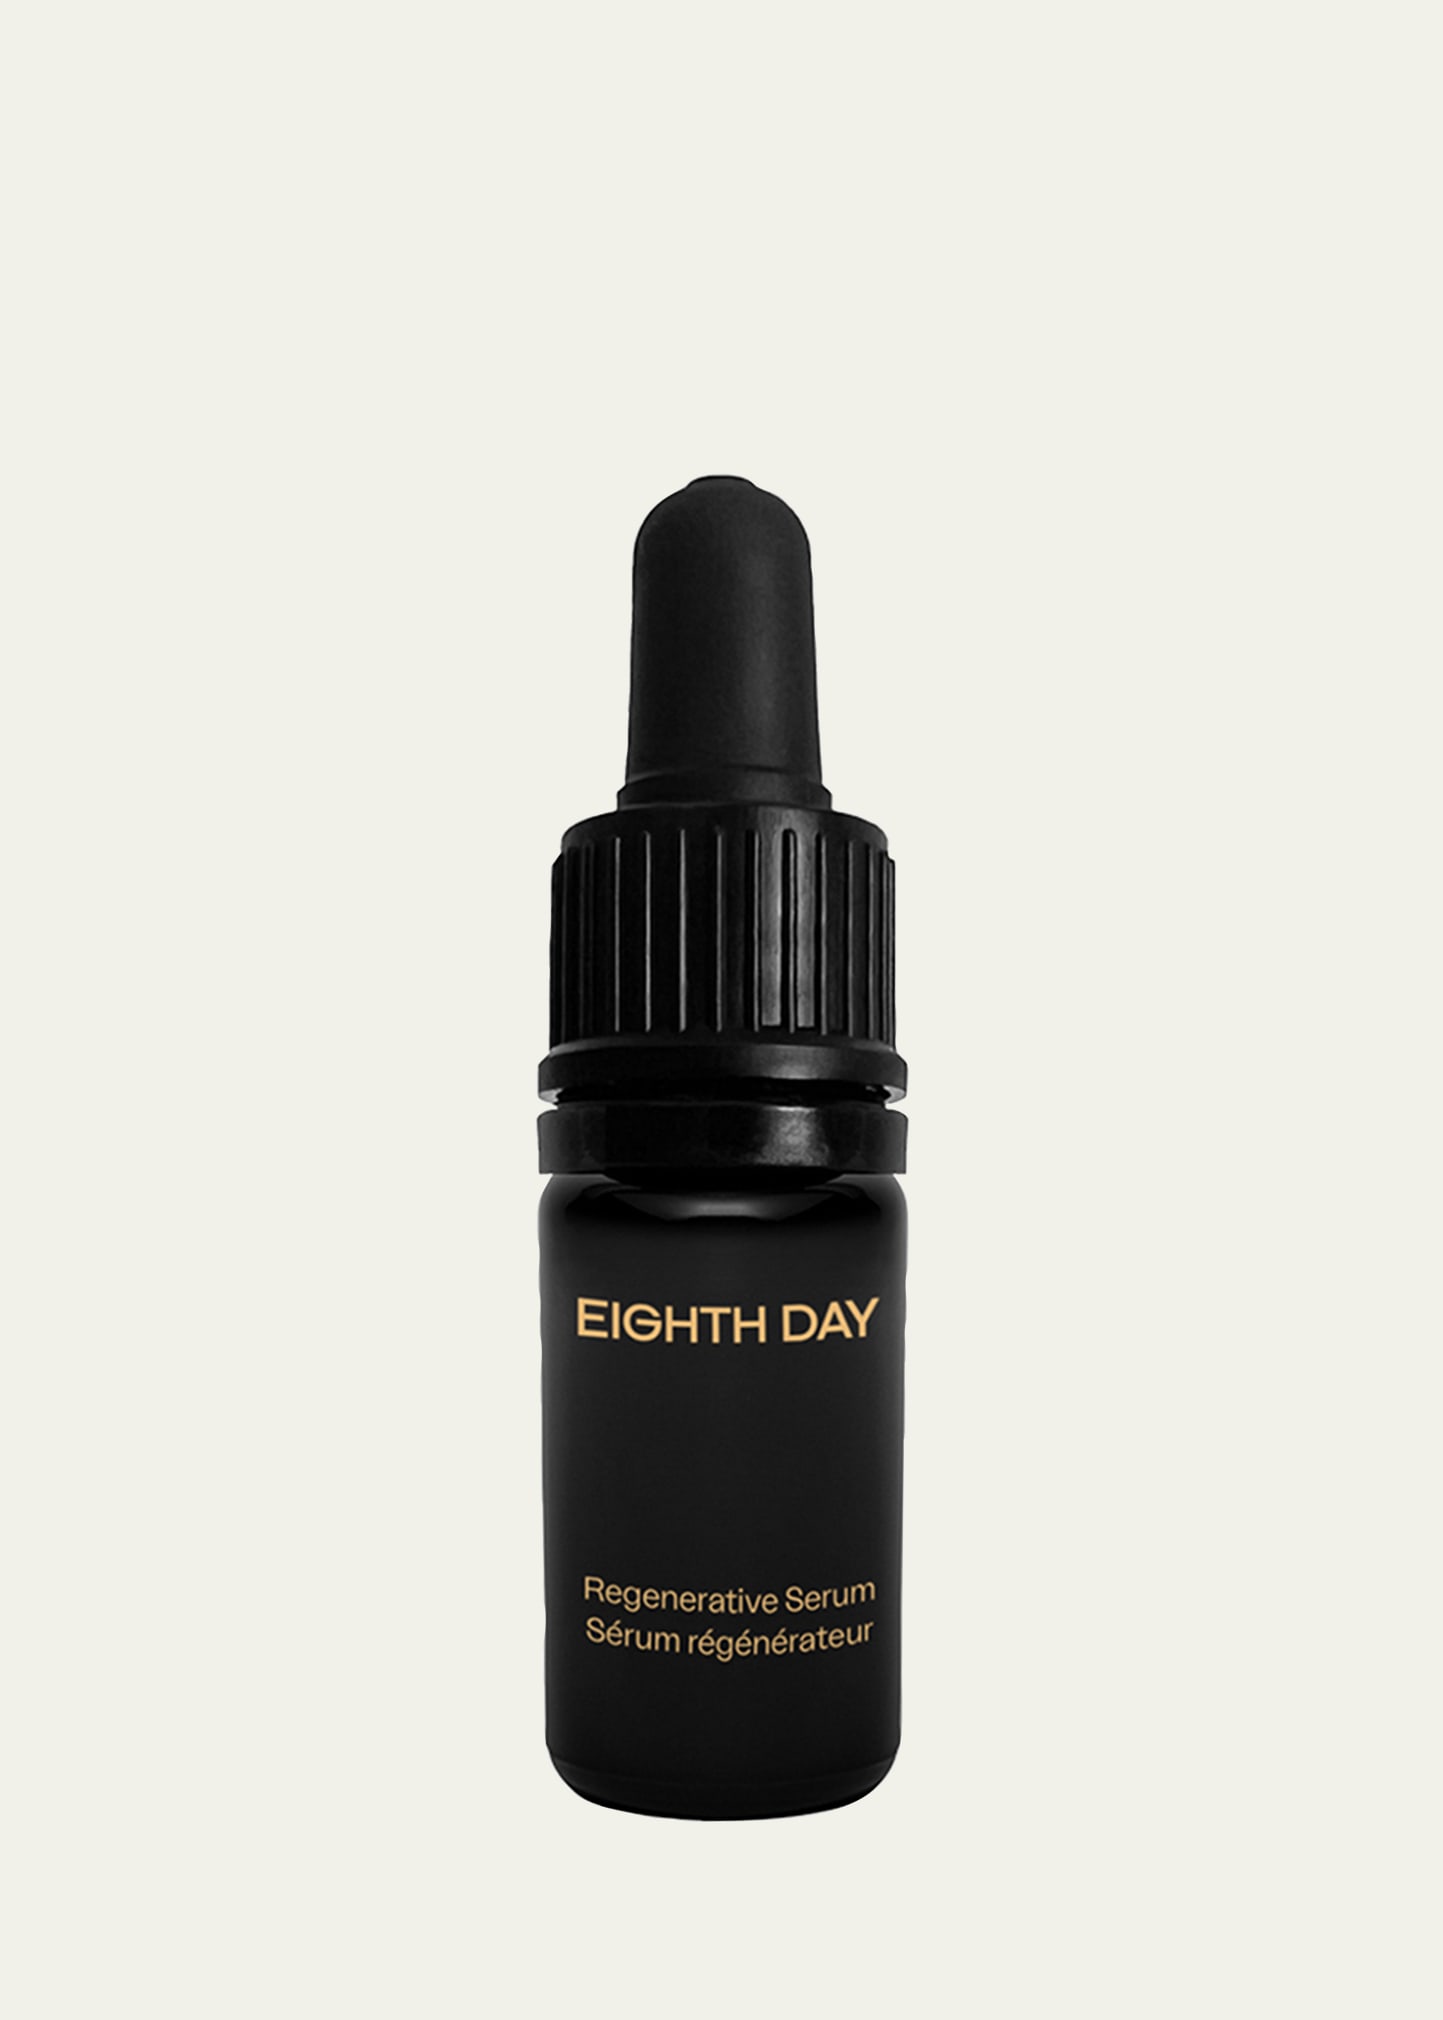 Regenerative Serum, Yours with any $250 EIGHTH DAY Order